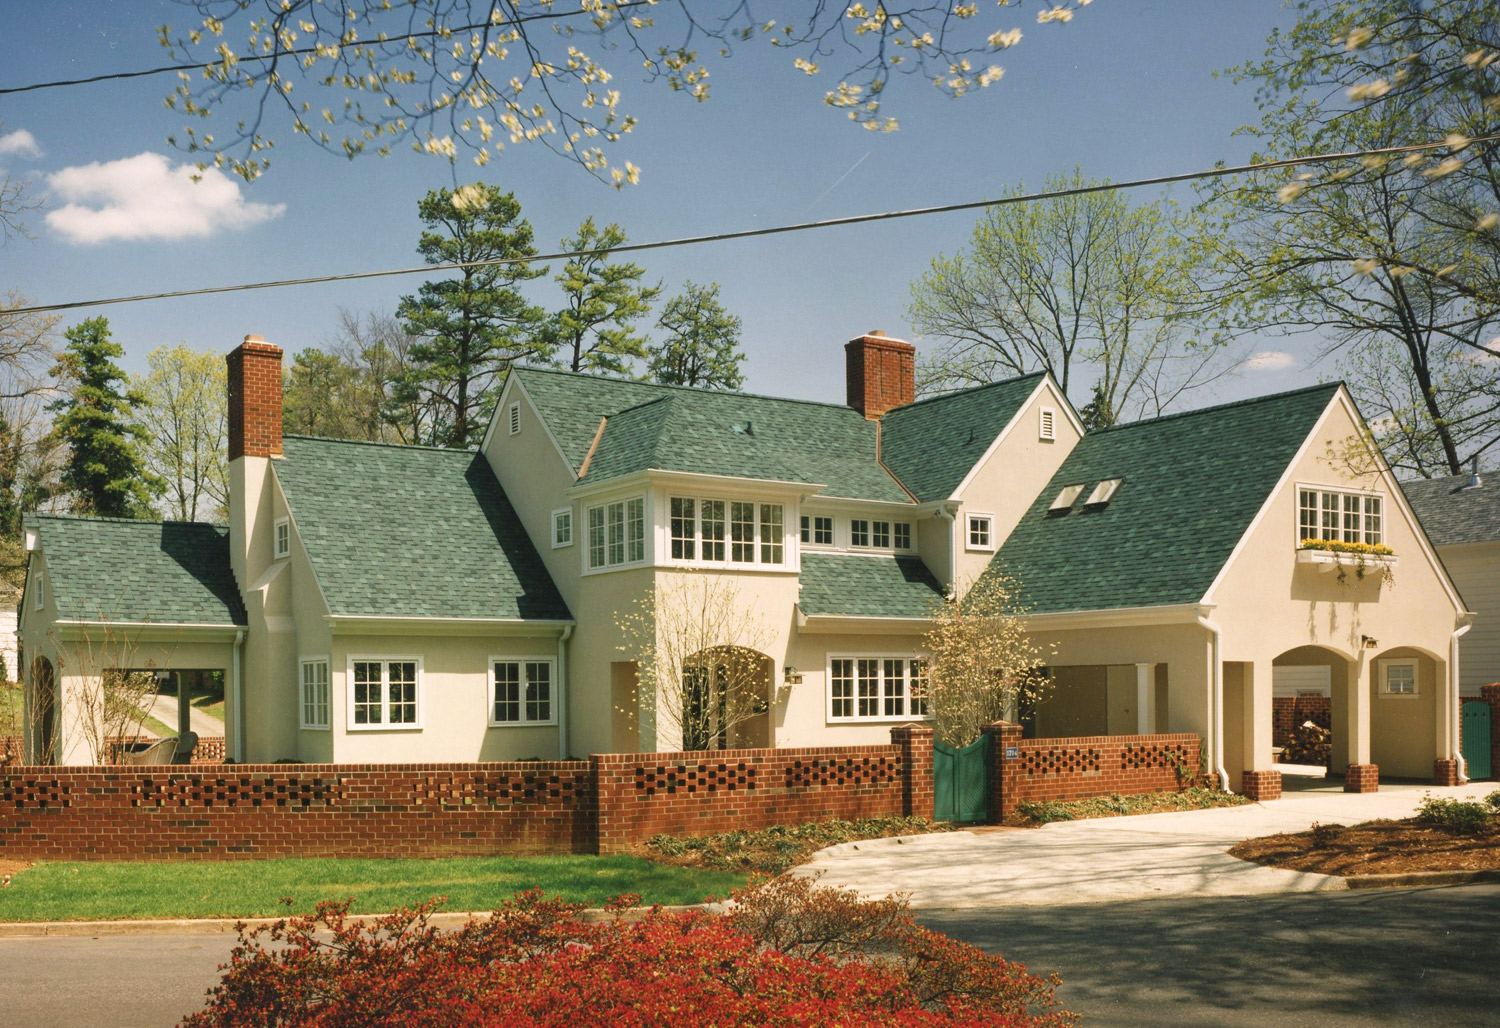 private-residence-greensboro-nc-01-a-plus-architects-frank-cheney-front-01-crop.jpg